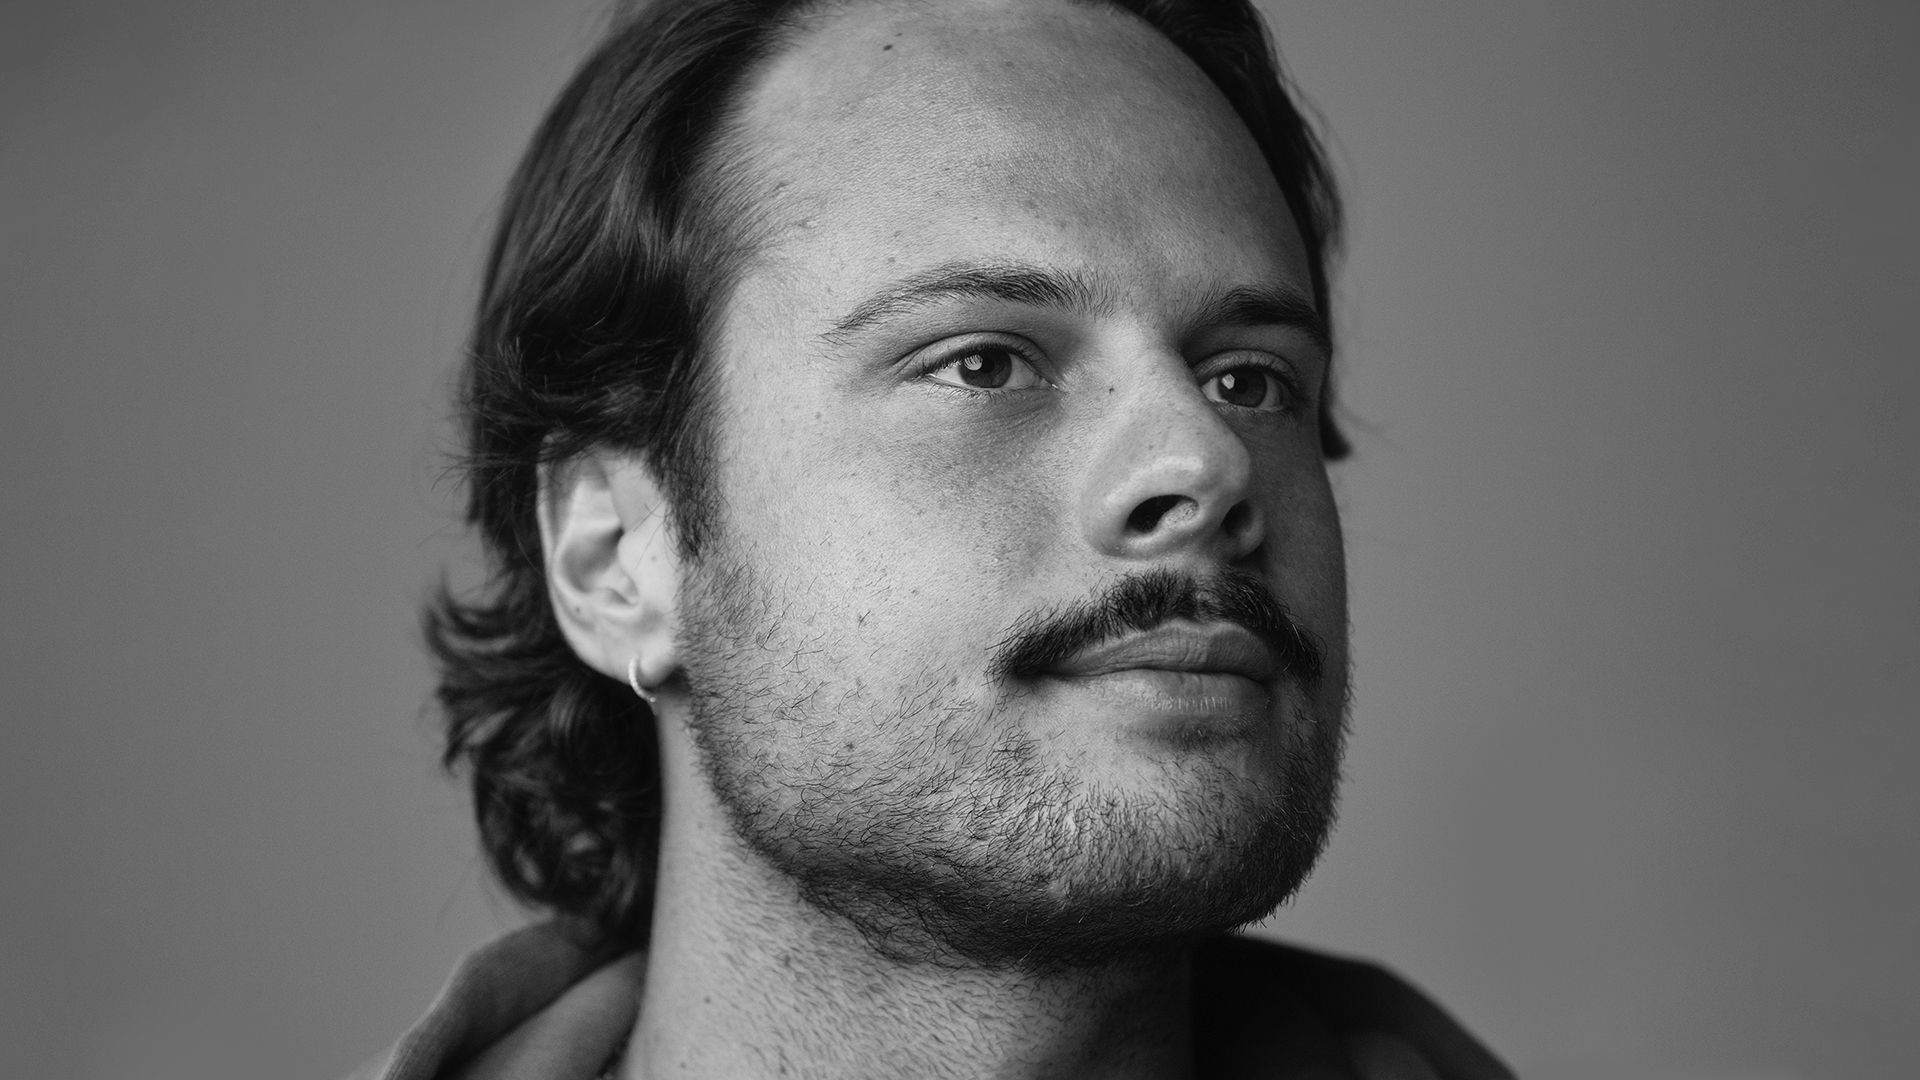 NHL MVP poses stoically for a Black and White portrait, his epic Mo is ready for Movember